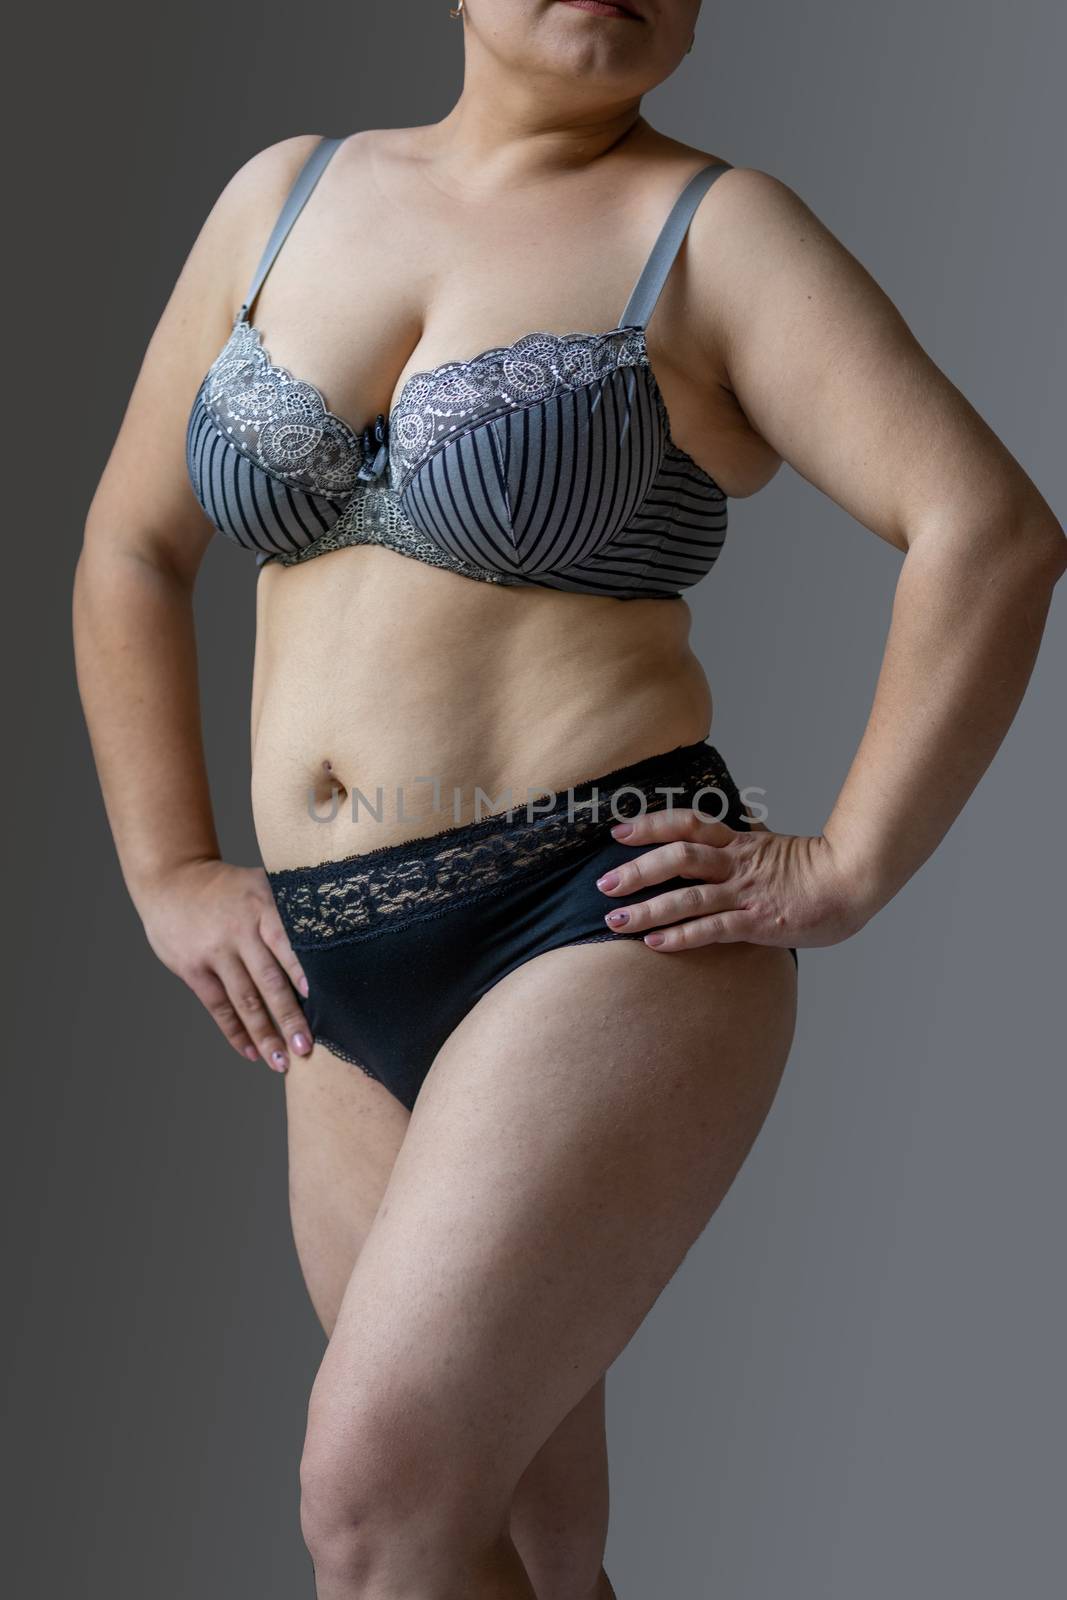 Natural Real Body Plus Size Woman in lingerie by adamr